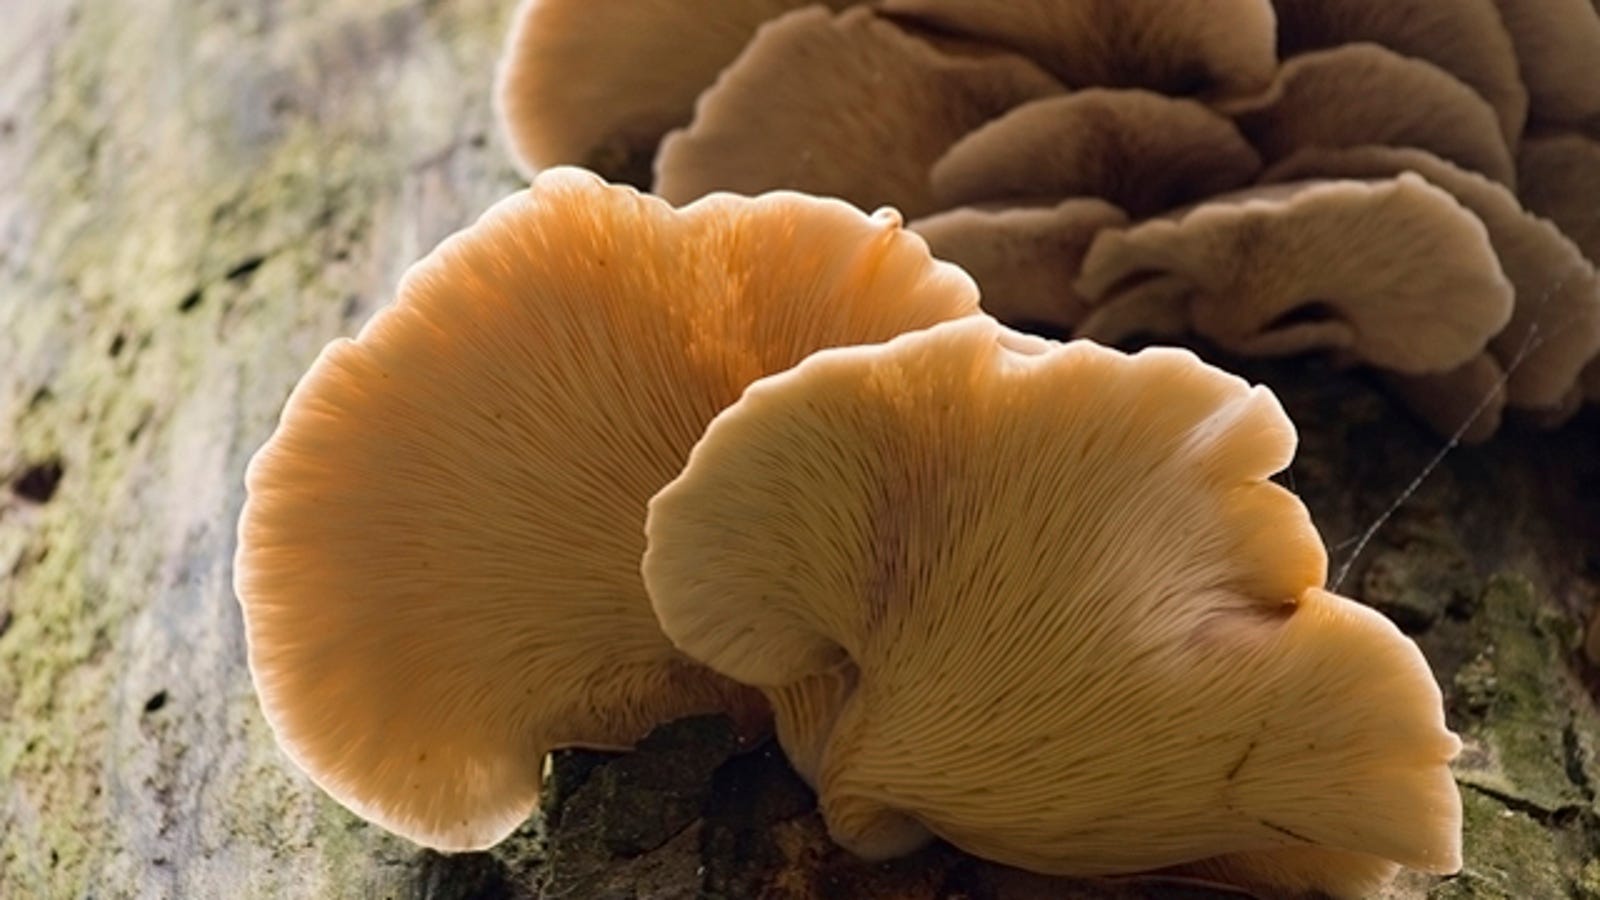 How Do I Tell If a Mushroom Is Safe to Eat?